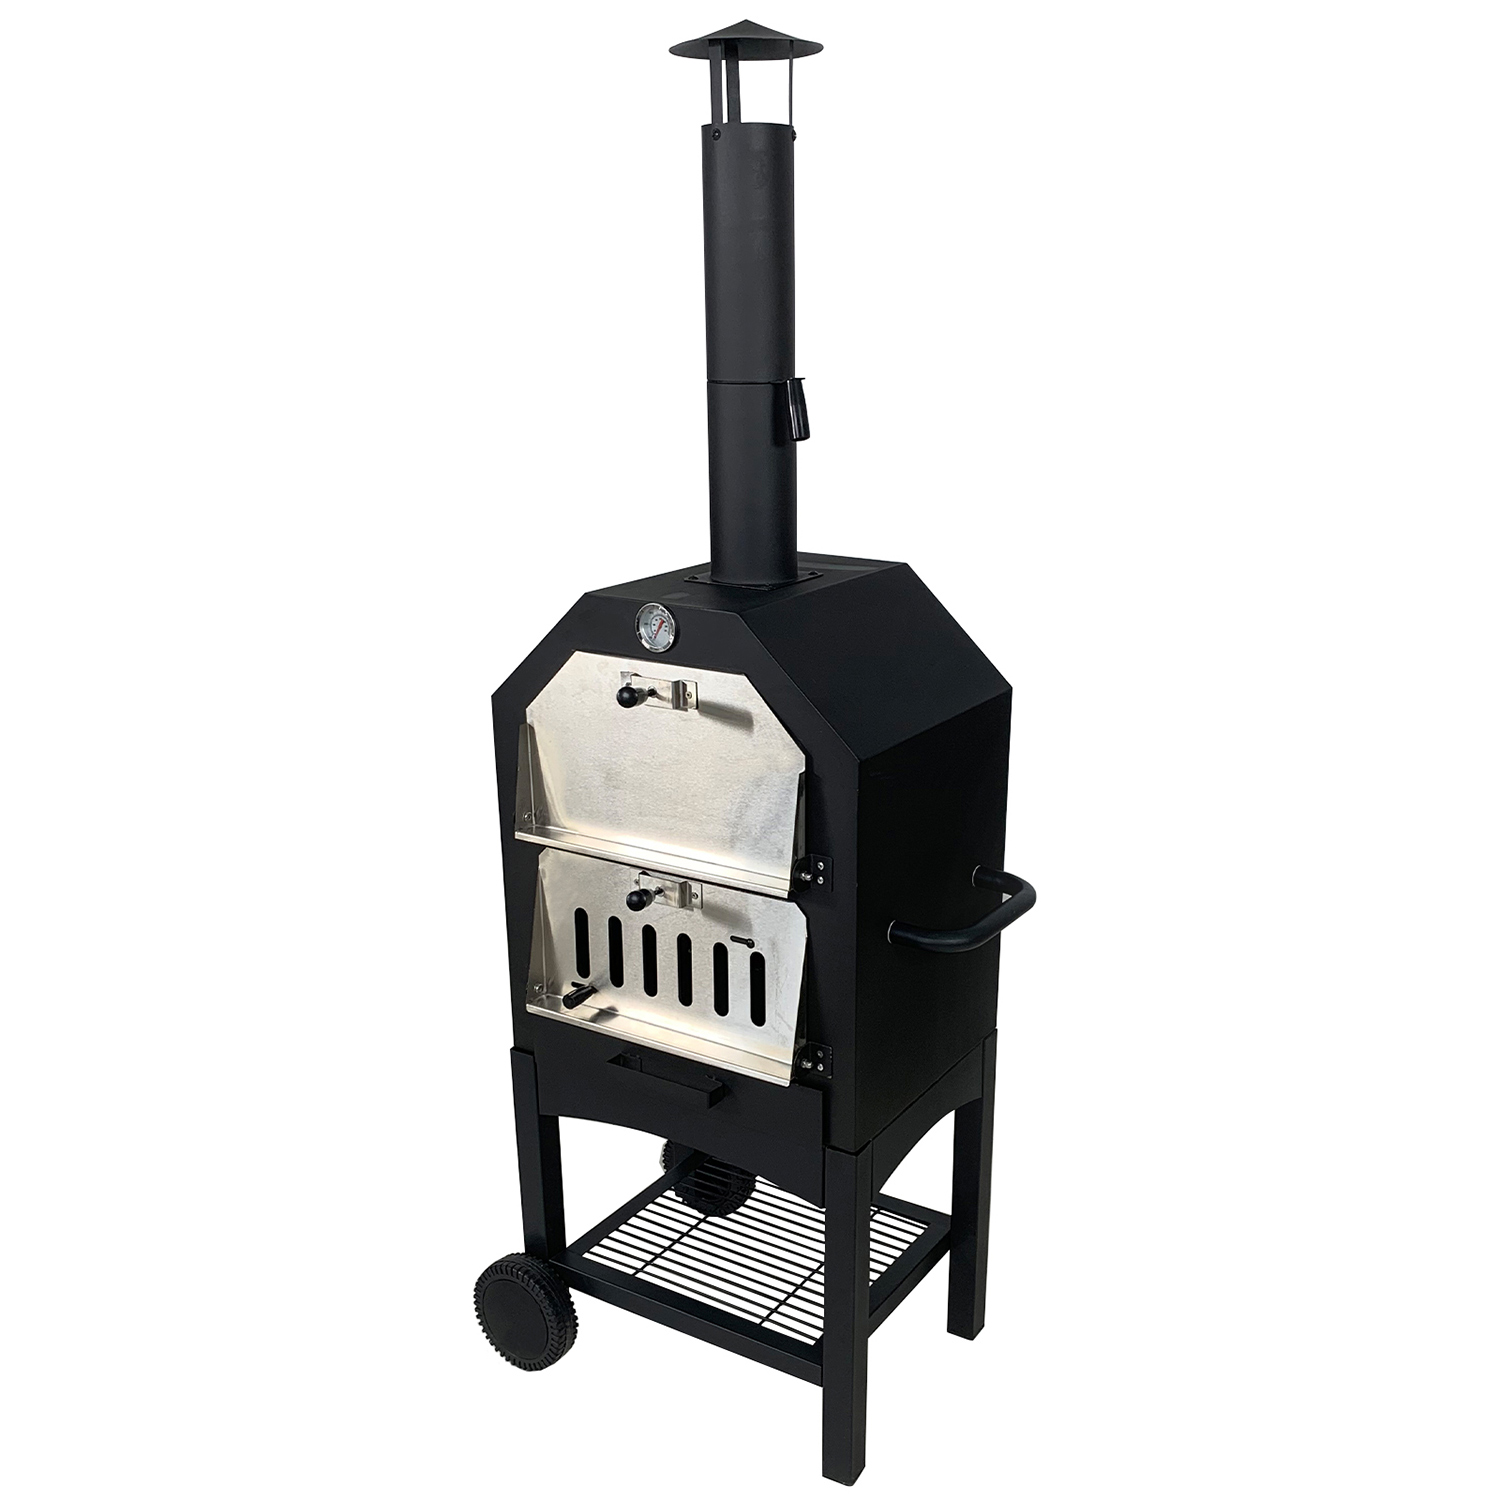 3 in 1 Outdoor charcoal pizza oven, BBQ and smoker